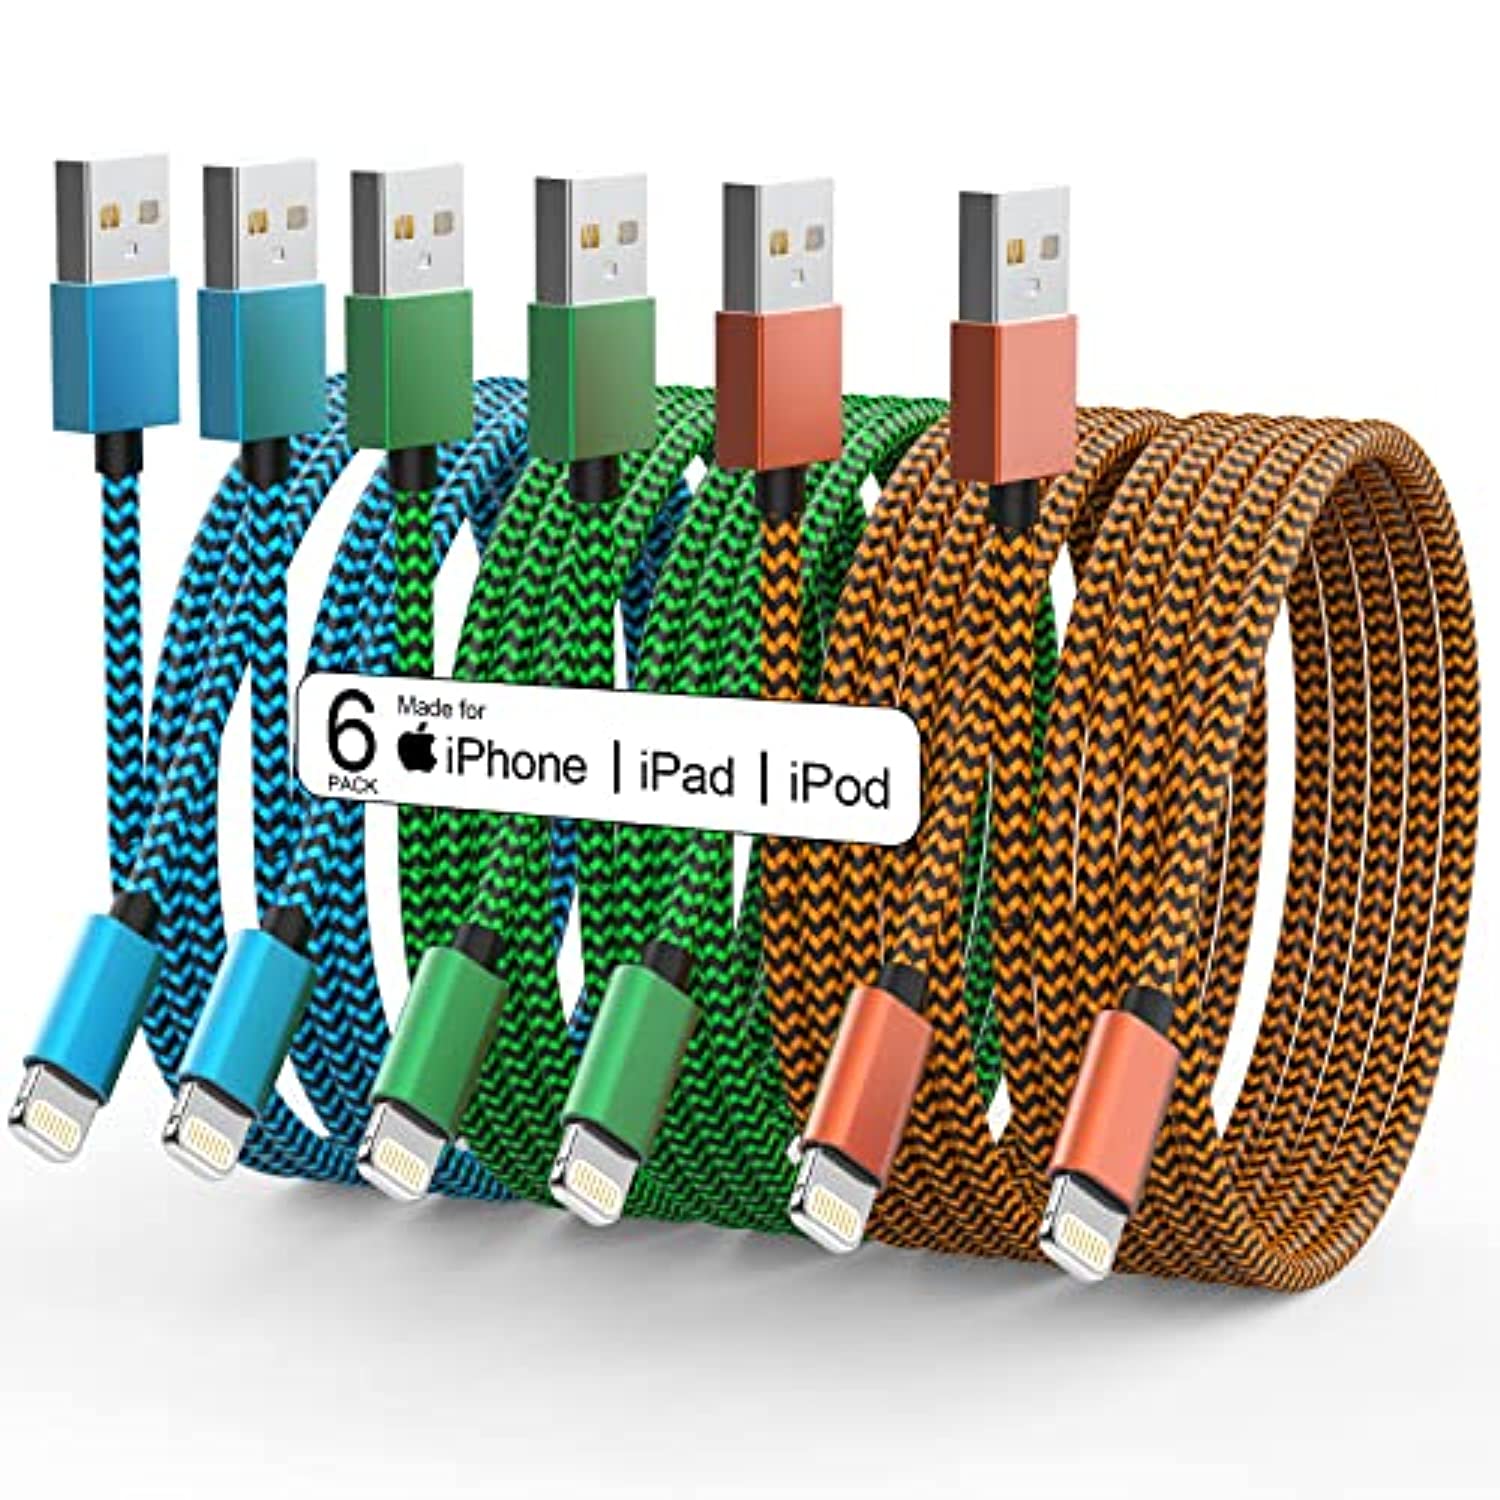 10 FT Nylon Braided USB to Fast Charging Sync Cord Compatible iPhone 14/13/12/11 Pro Max/XS/XR/X/8/7/6 /iPad - 6 Pack